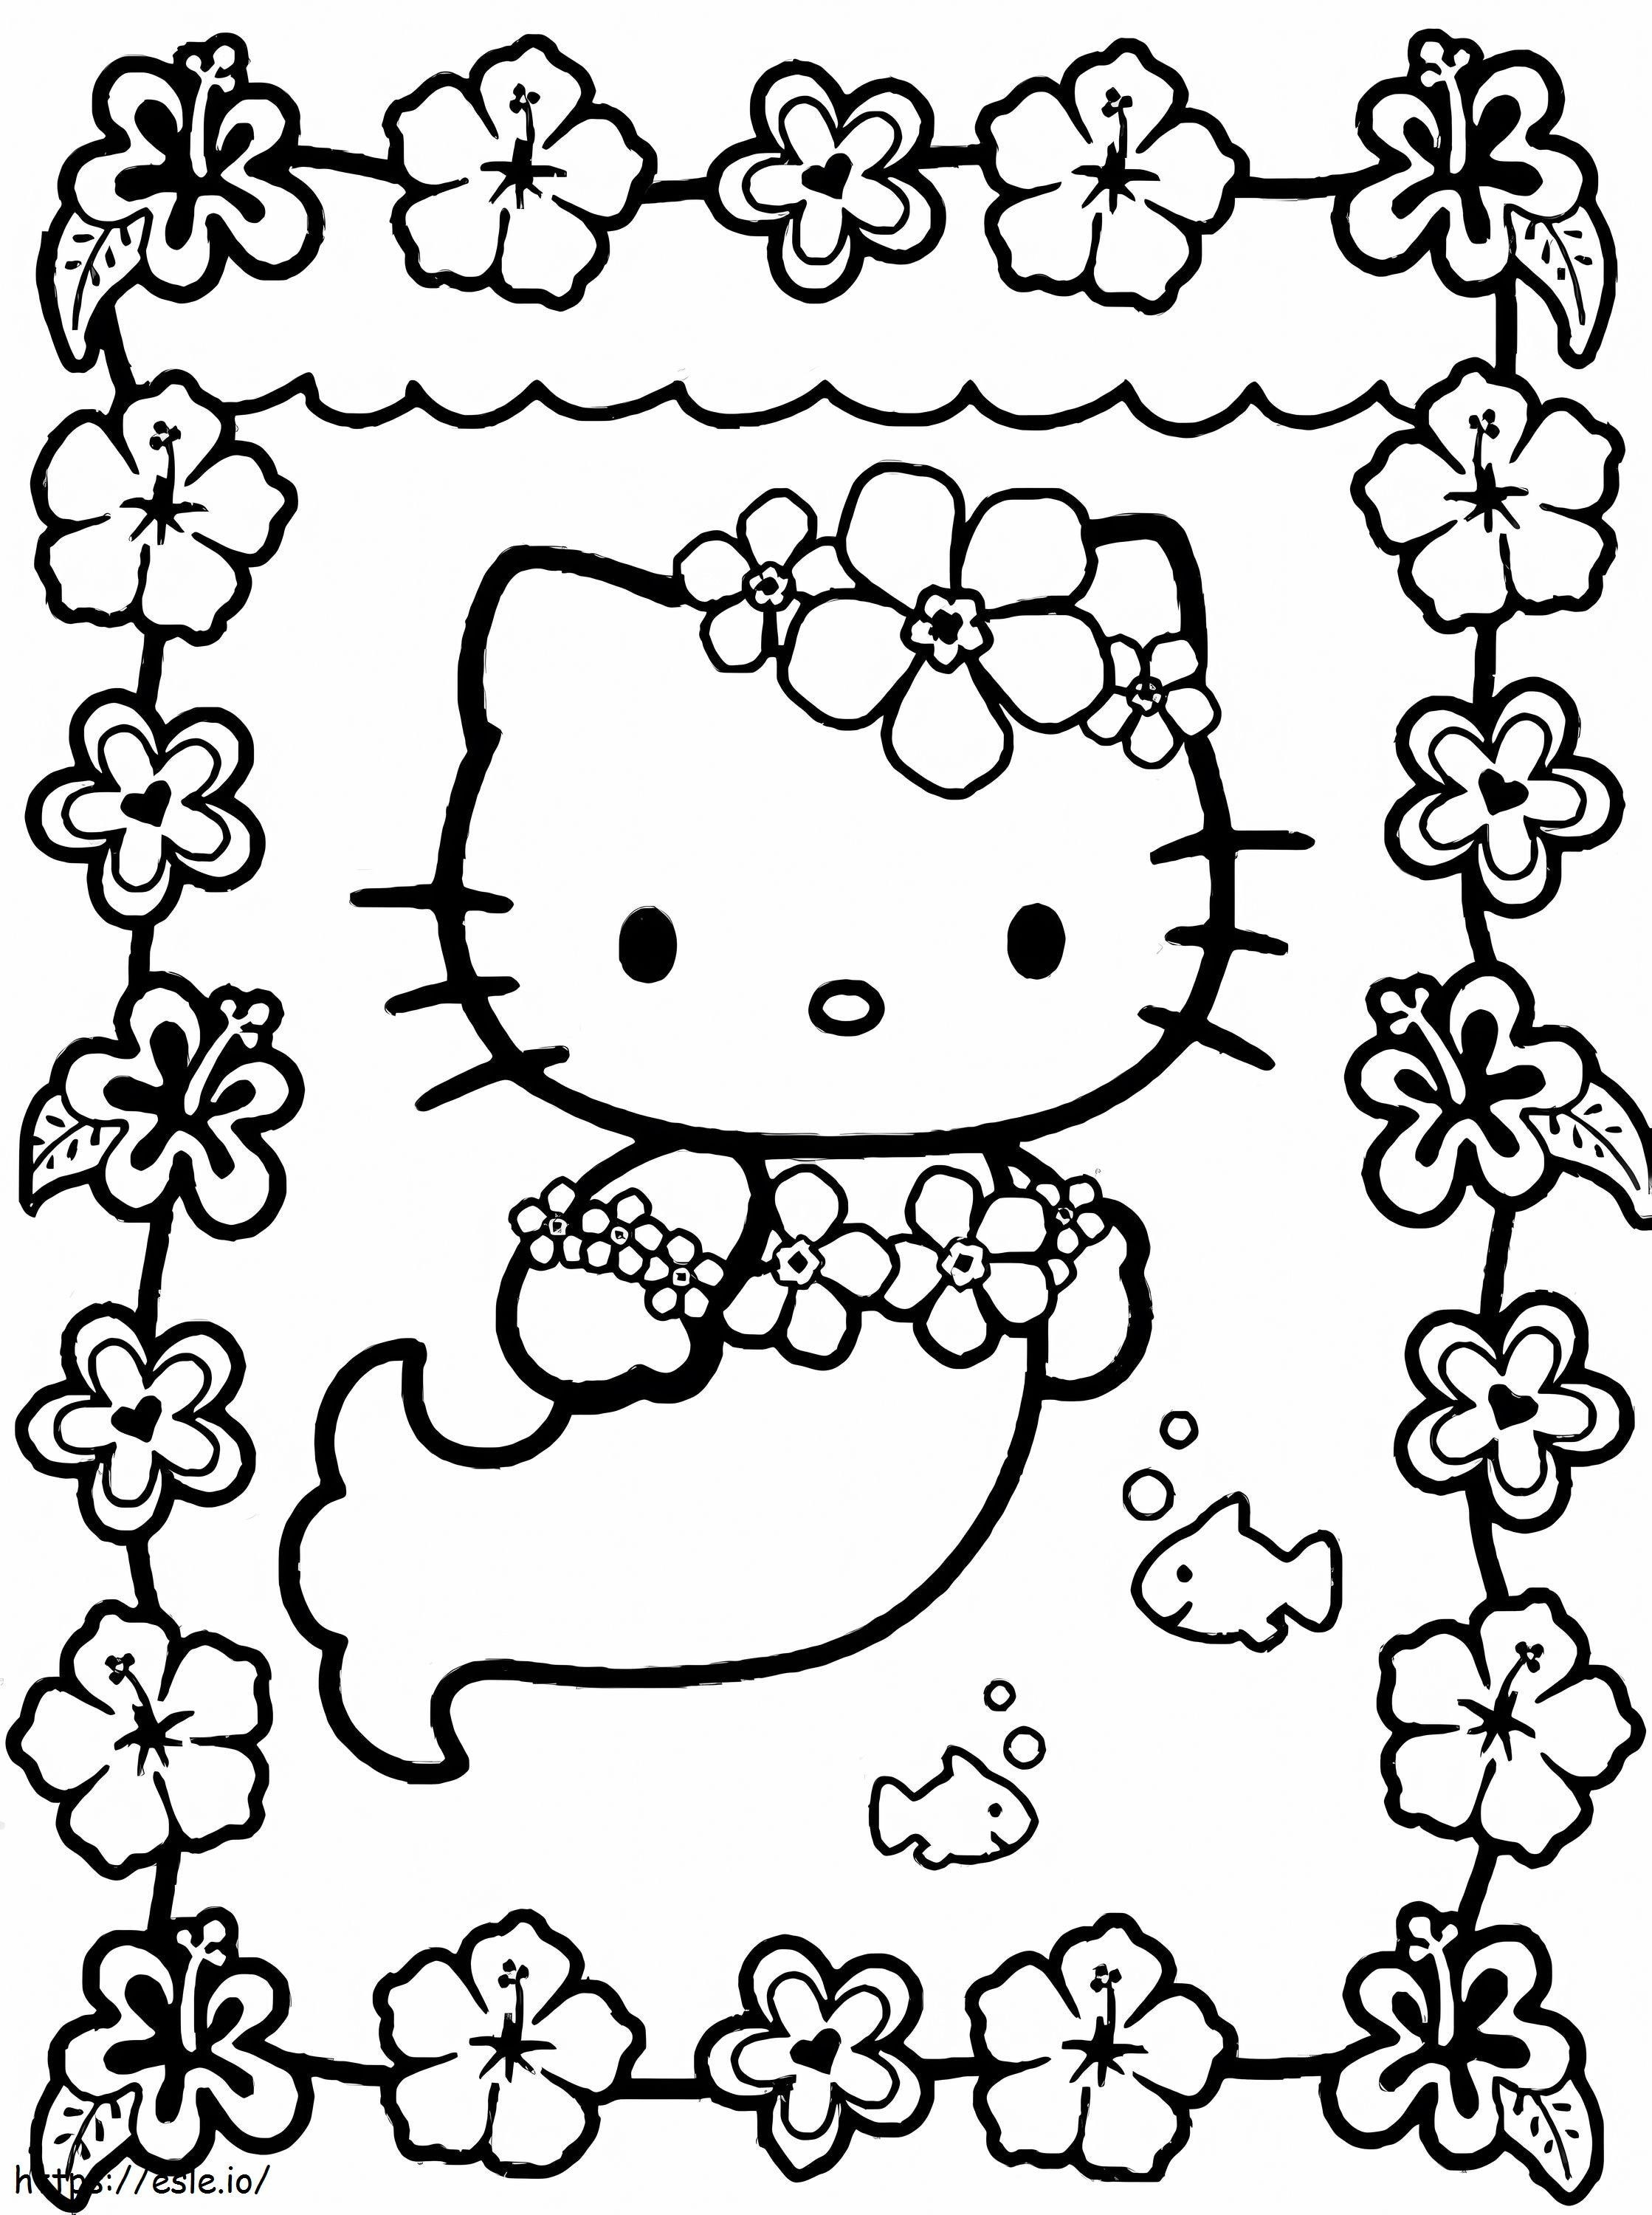 Hello Kitty Mermaid With Flowers coloring page